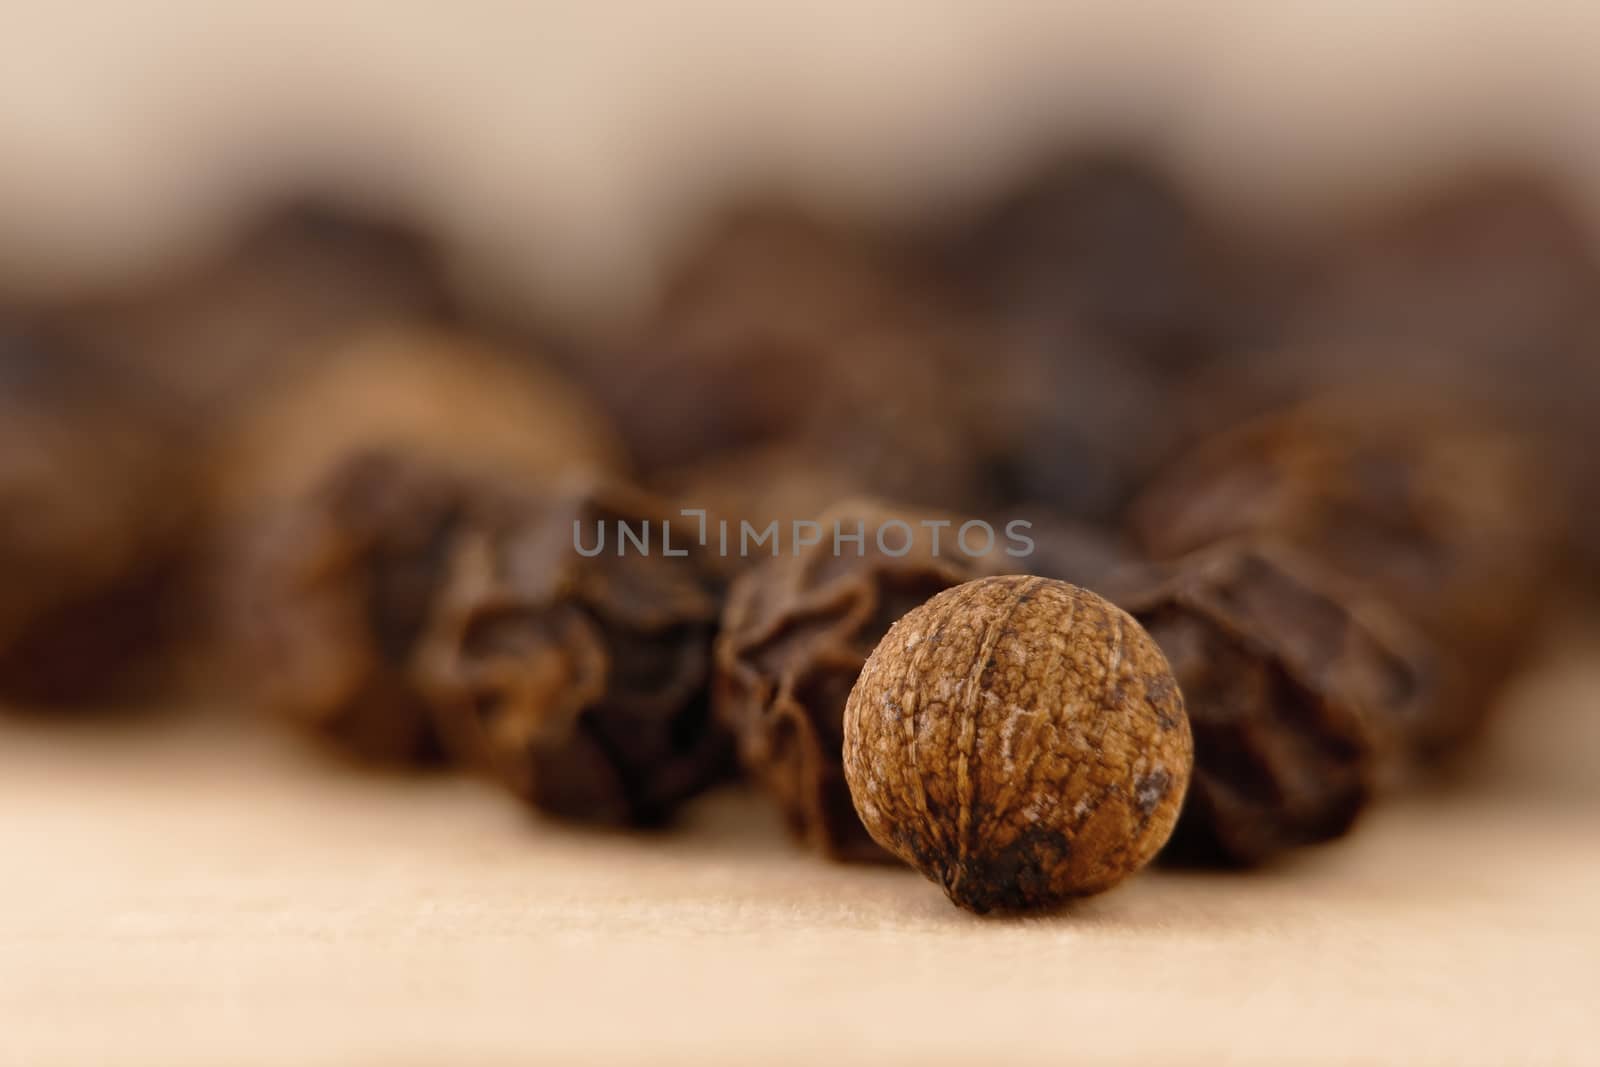 close-up of a black pepper (Piper nigrum) on the wooden surface